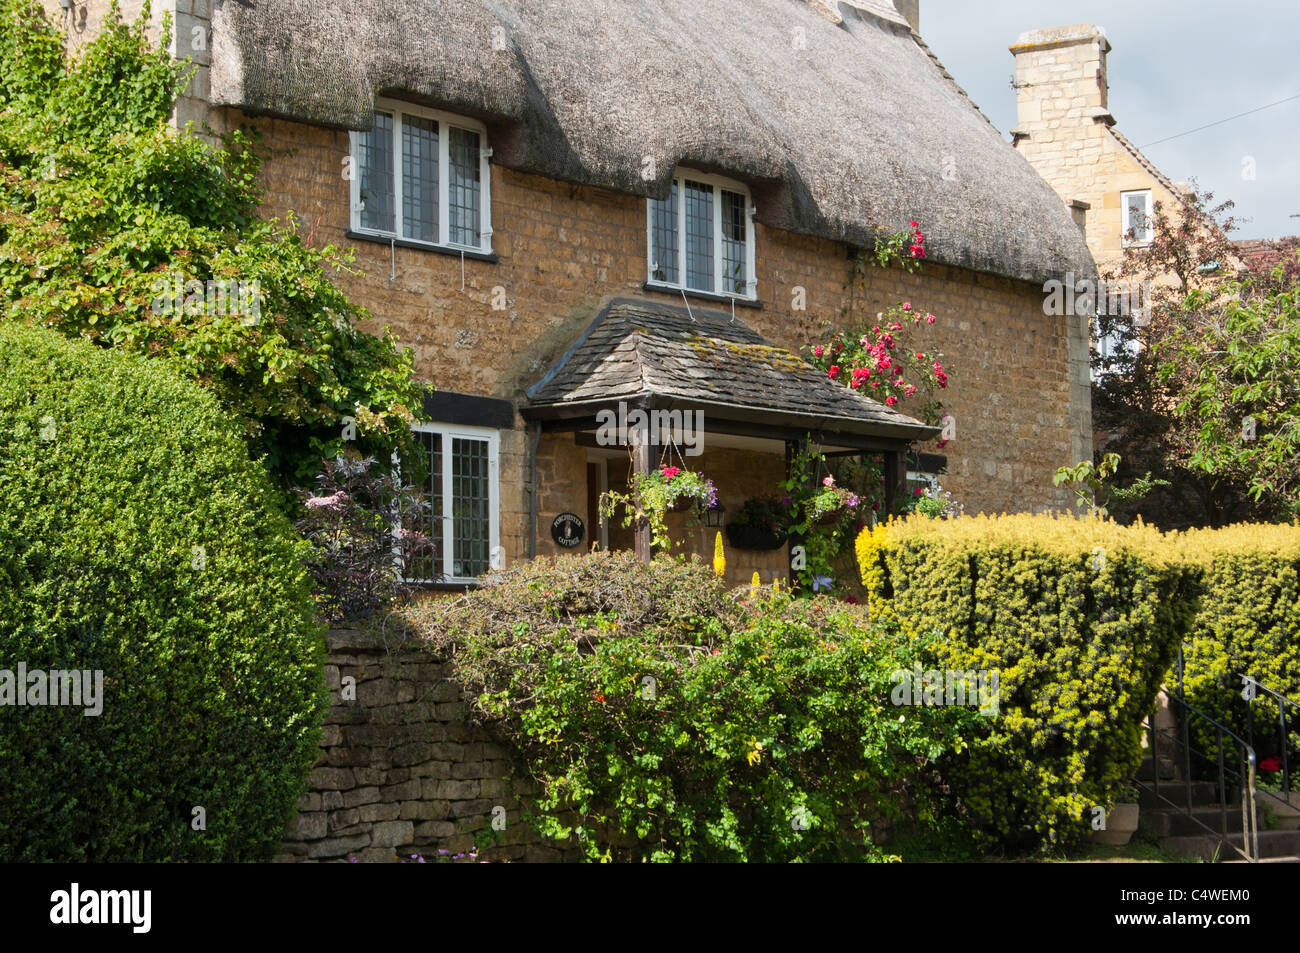 Cotswold thatched cottage in Chipping Campden, Gloucestershire, UK Stock Photo